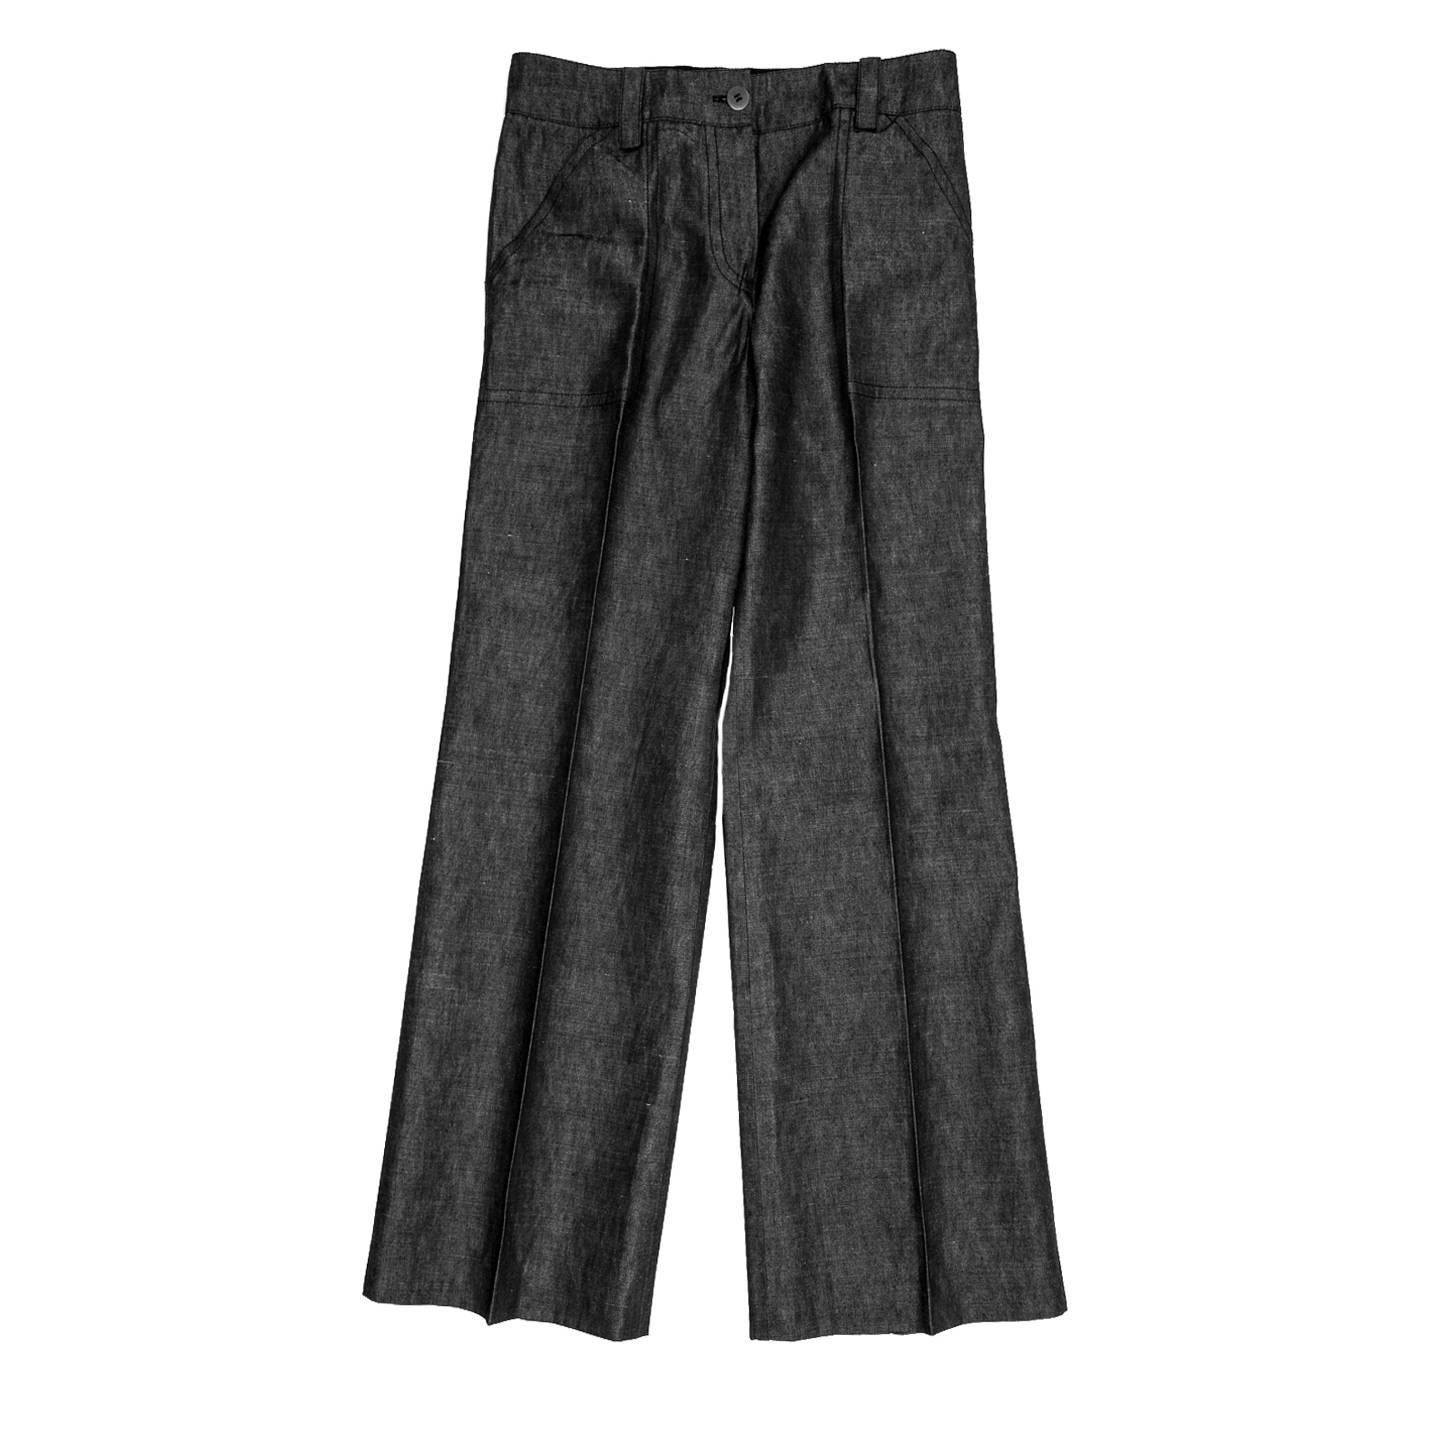 Cotton & ramie blend denim trousers palazzo style suit pleated. The front pockets are slanted, at back the slit pockets fasten with a metal button and loop and their shapes are delineated by double rows of dark blue top stitches to match the ones on